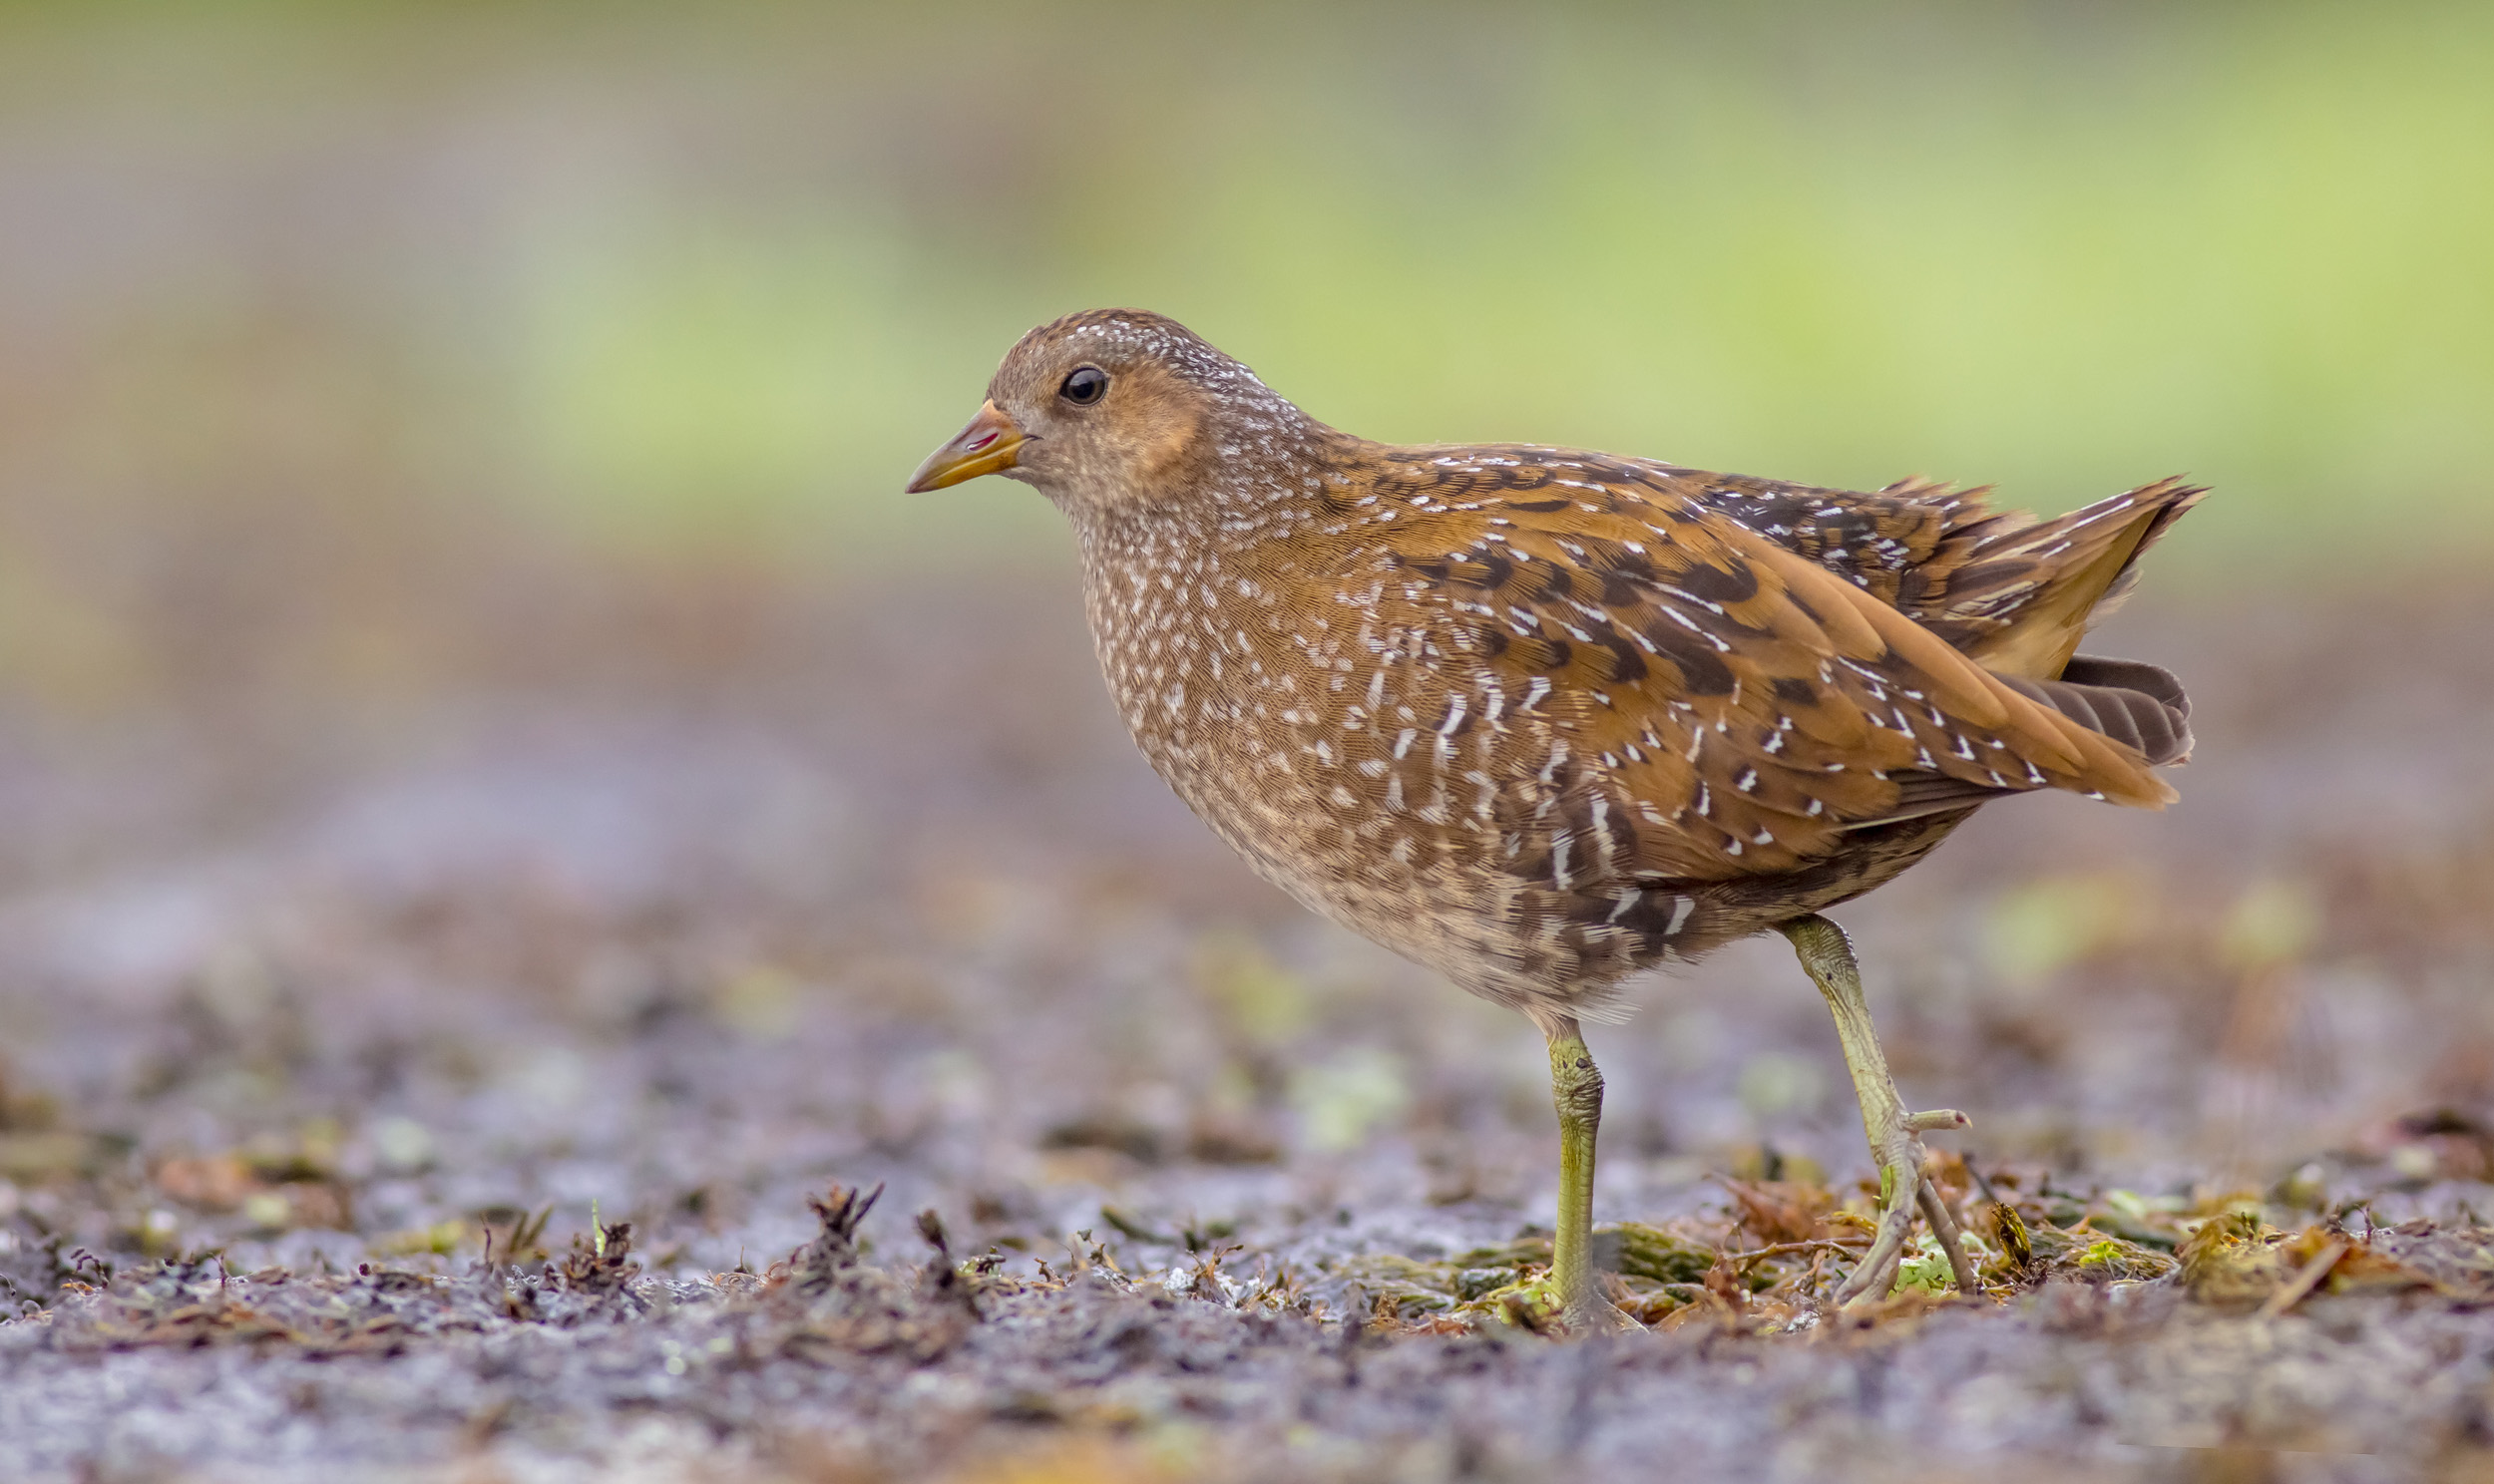 A juvenile Spotted Crake chick walking across wetland.